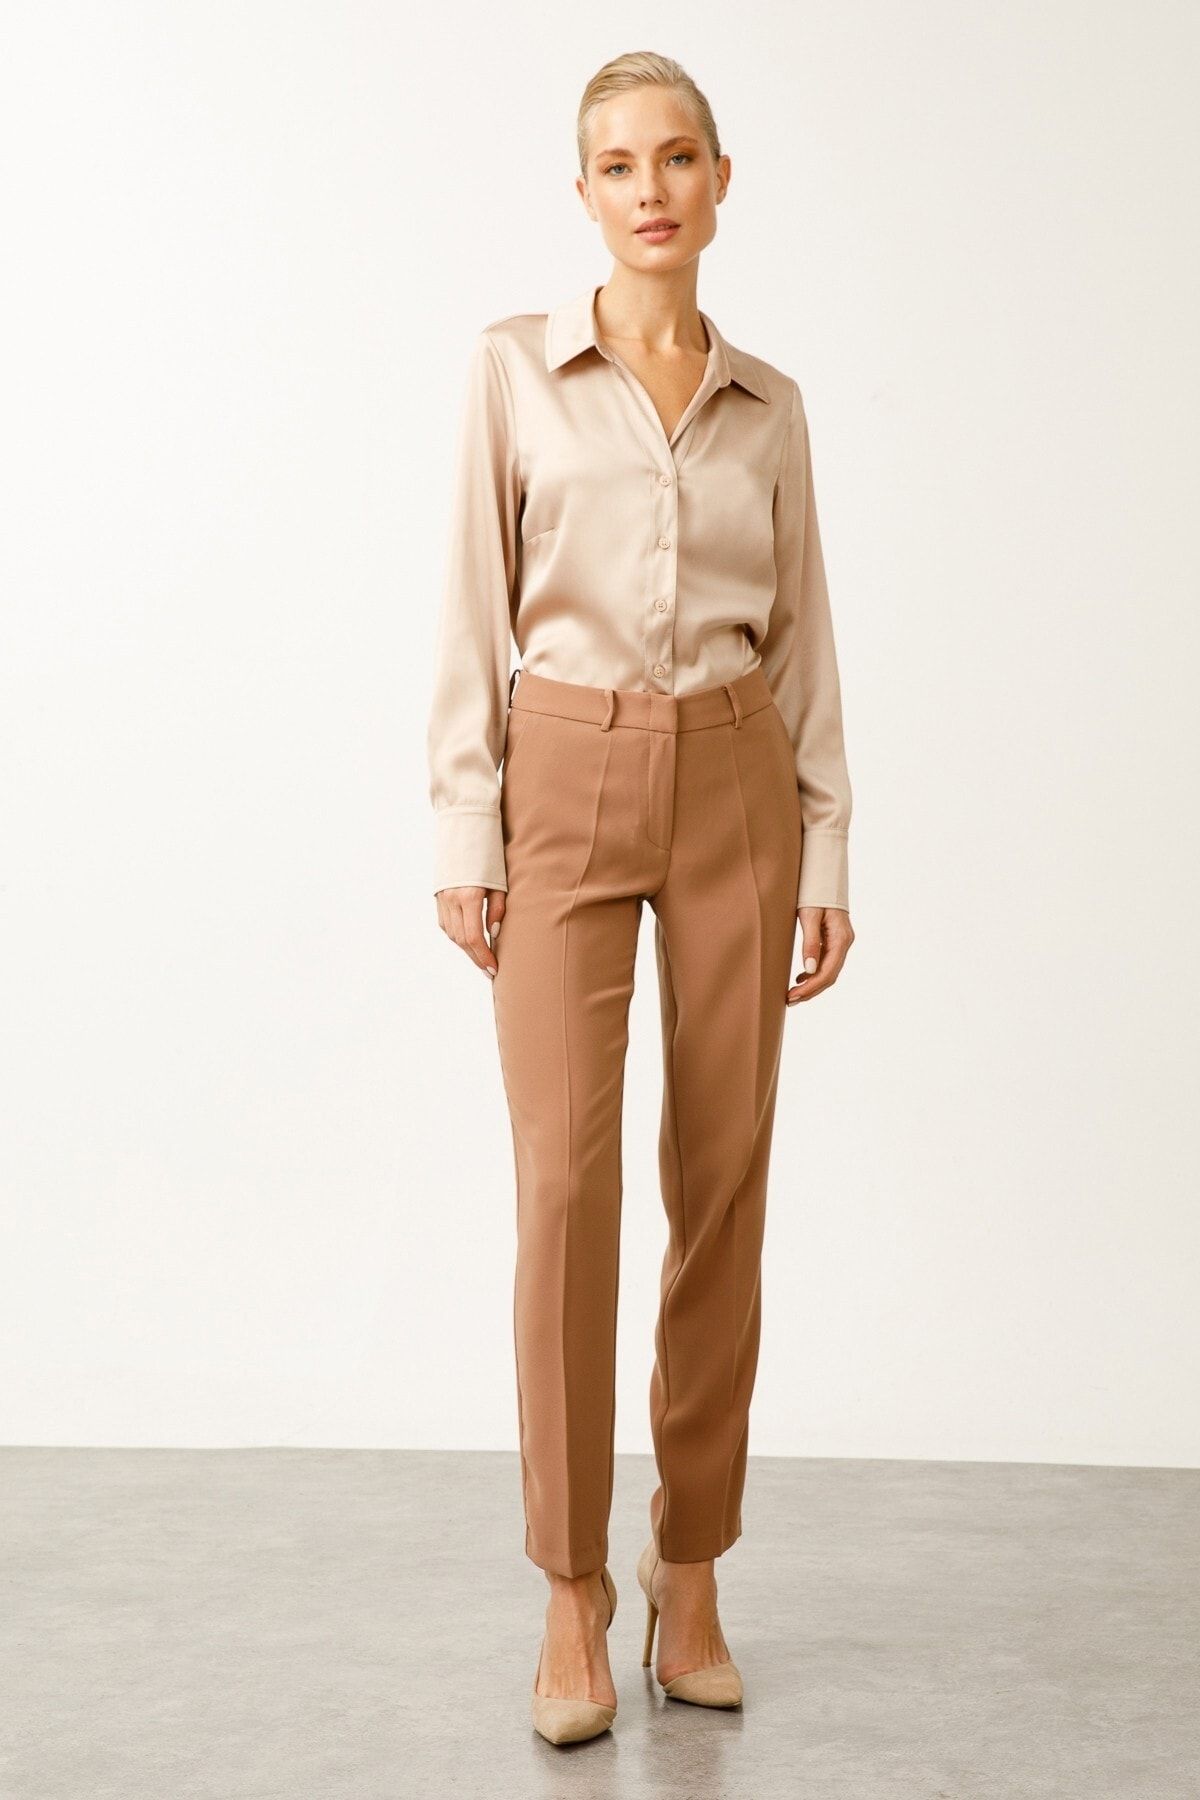 ASOS EDITION tailored trousers in camel | ASOS